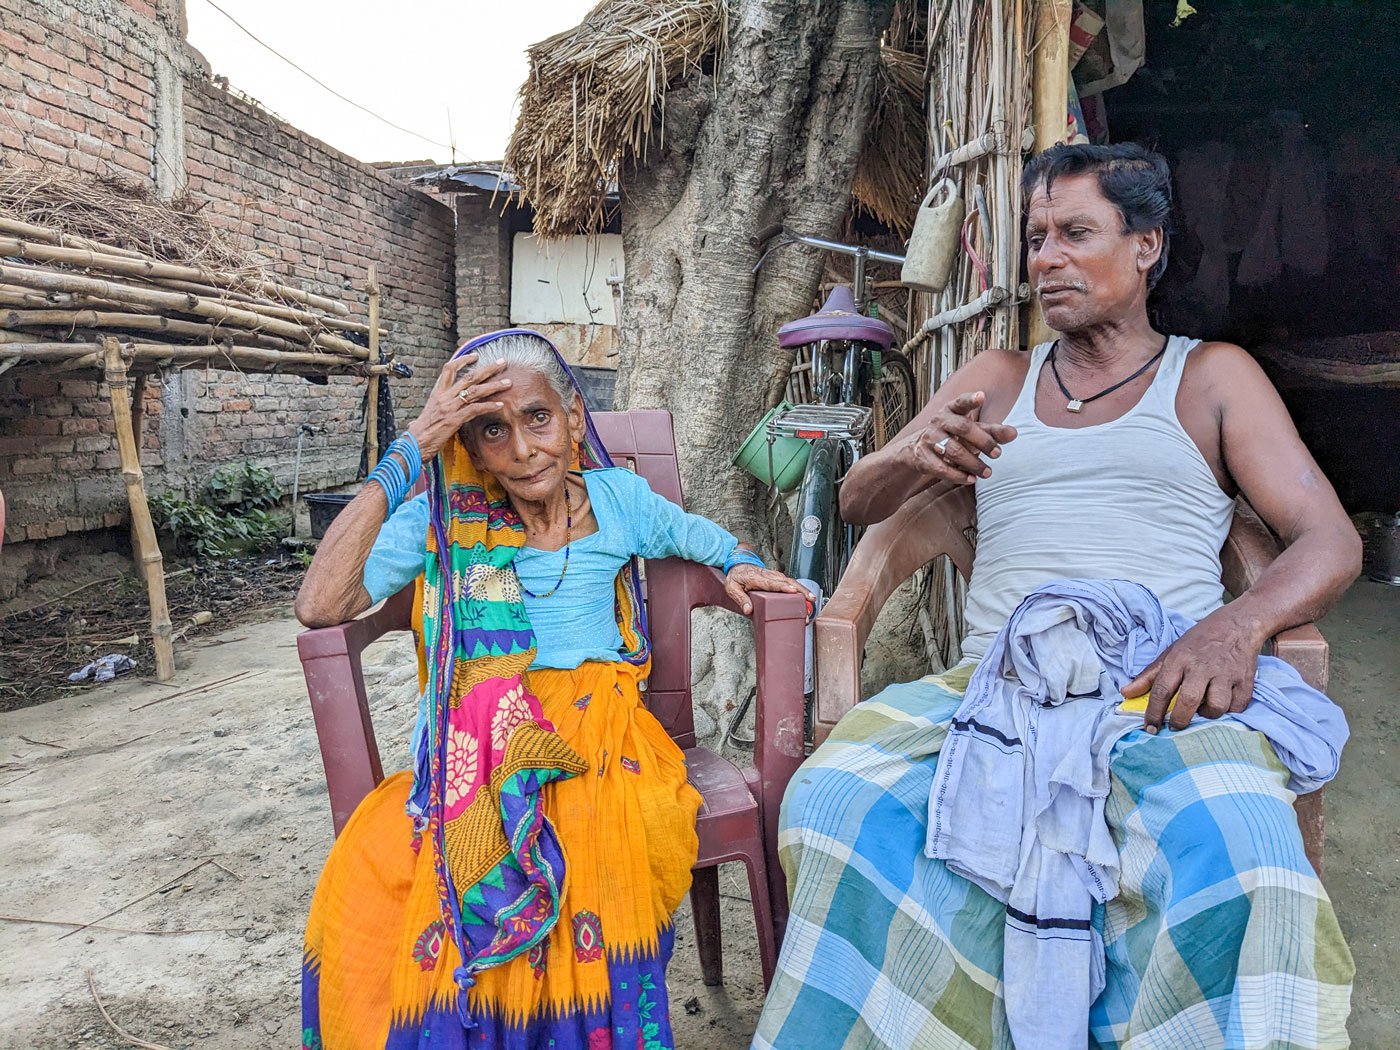 Khalifa and his 55-year-old wife, Momina, in front of their hut. Momina used to work as a tattoo artist in nearby villages